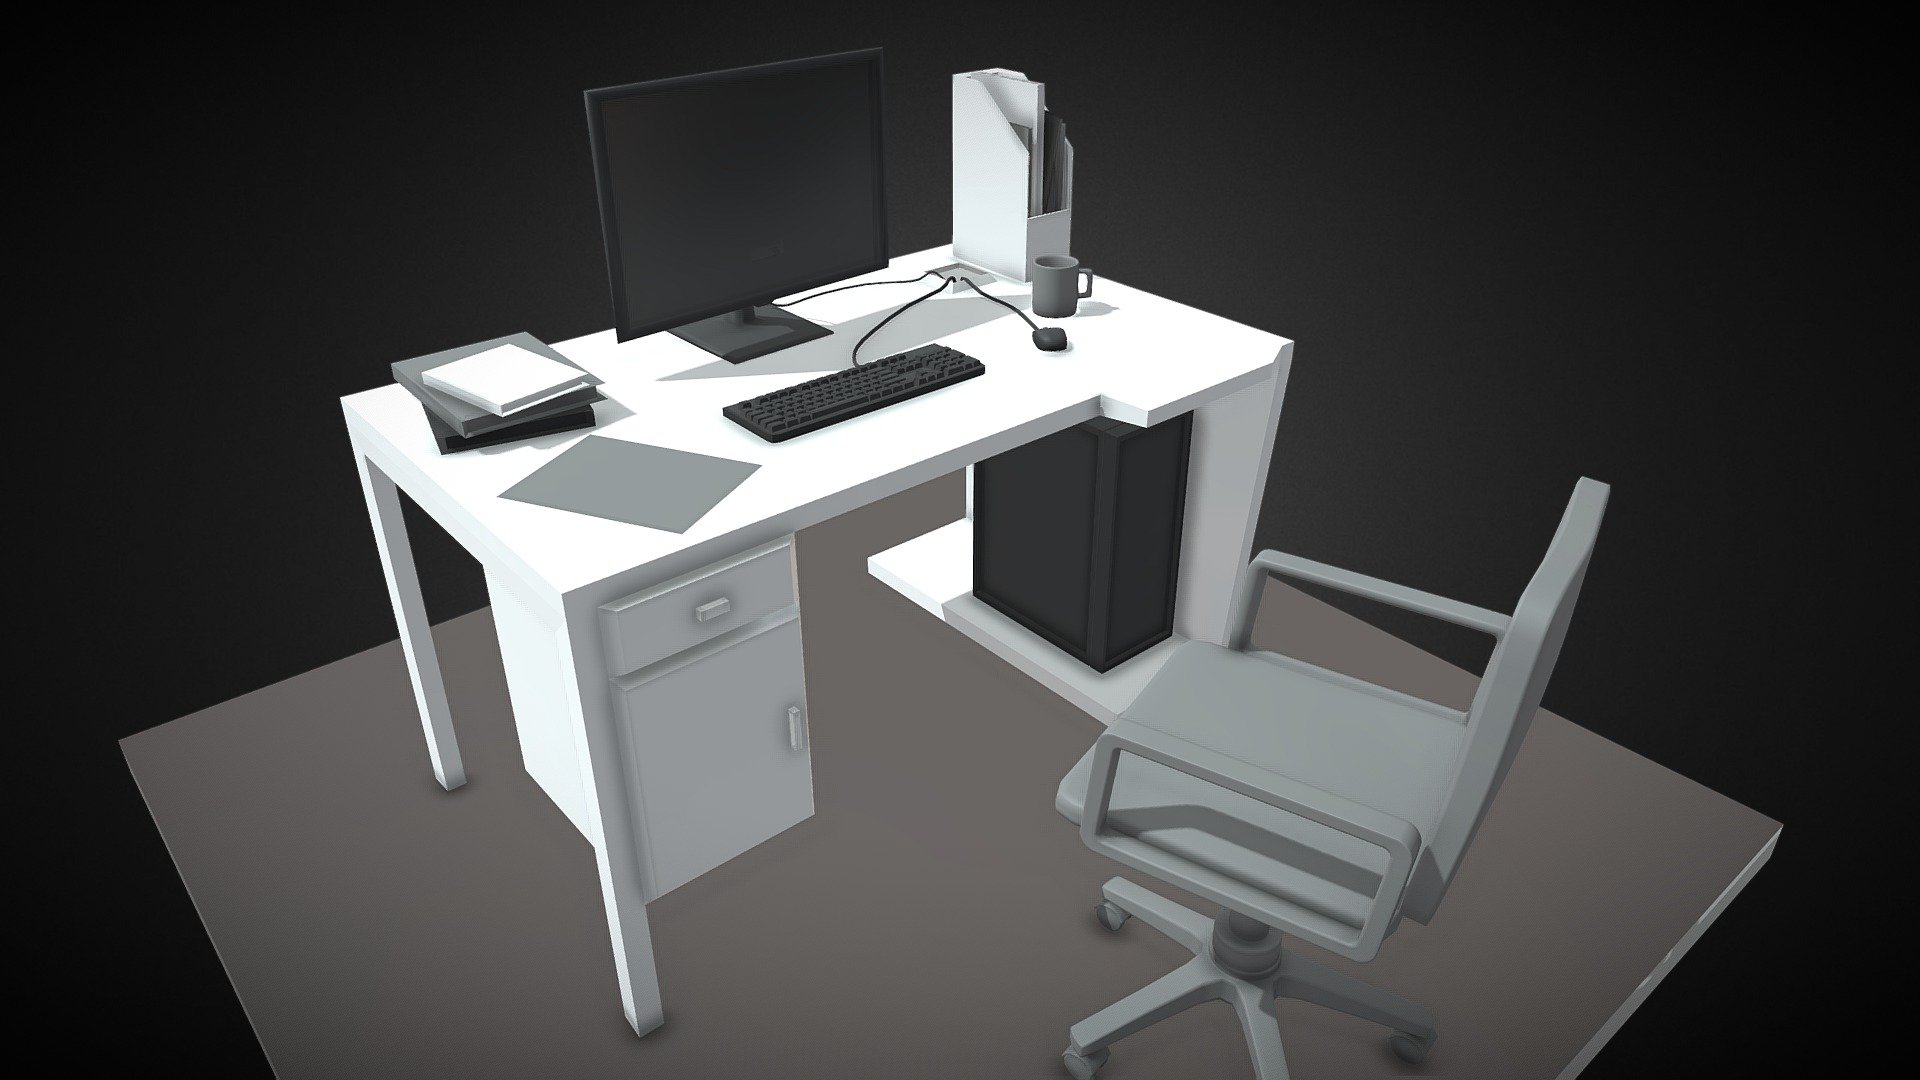 Practice using primitives with modifiers! - Cool Office Desk - 3D model by neuro99 3d model